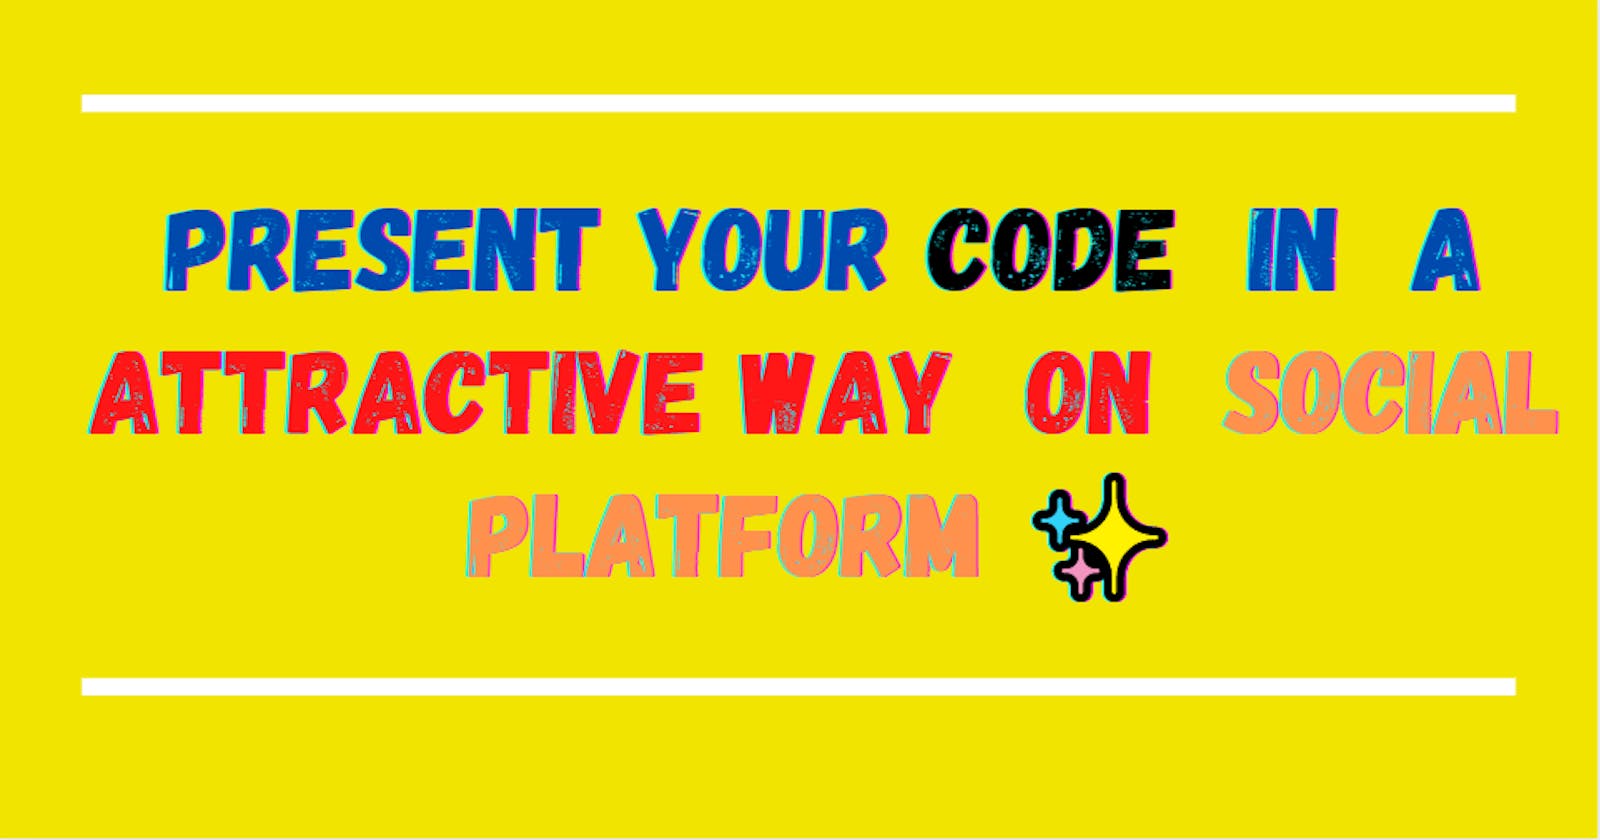 Presenting your code in a attractive way on social platform ✨